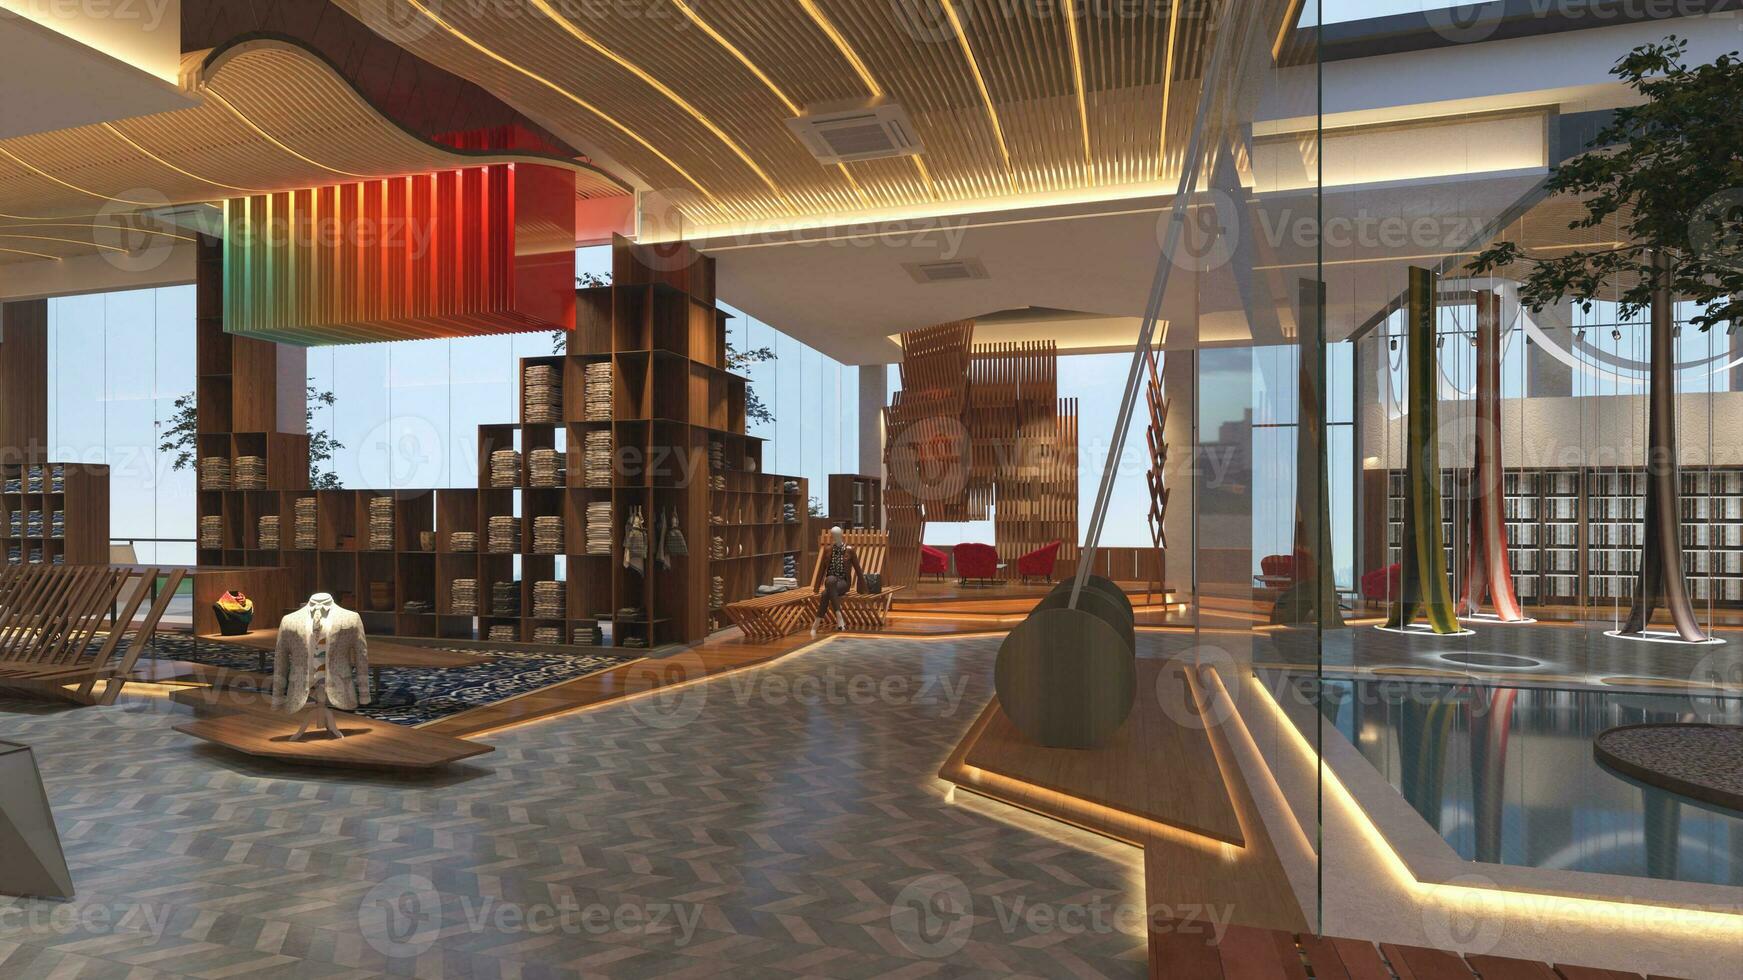 A Glimpse of Grandeur The Luxury Mall Interior Design at Shopping City 3D rendering photo